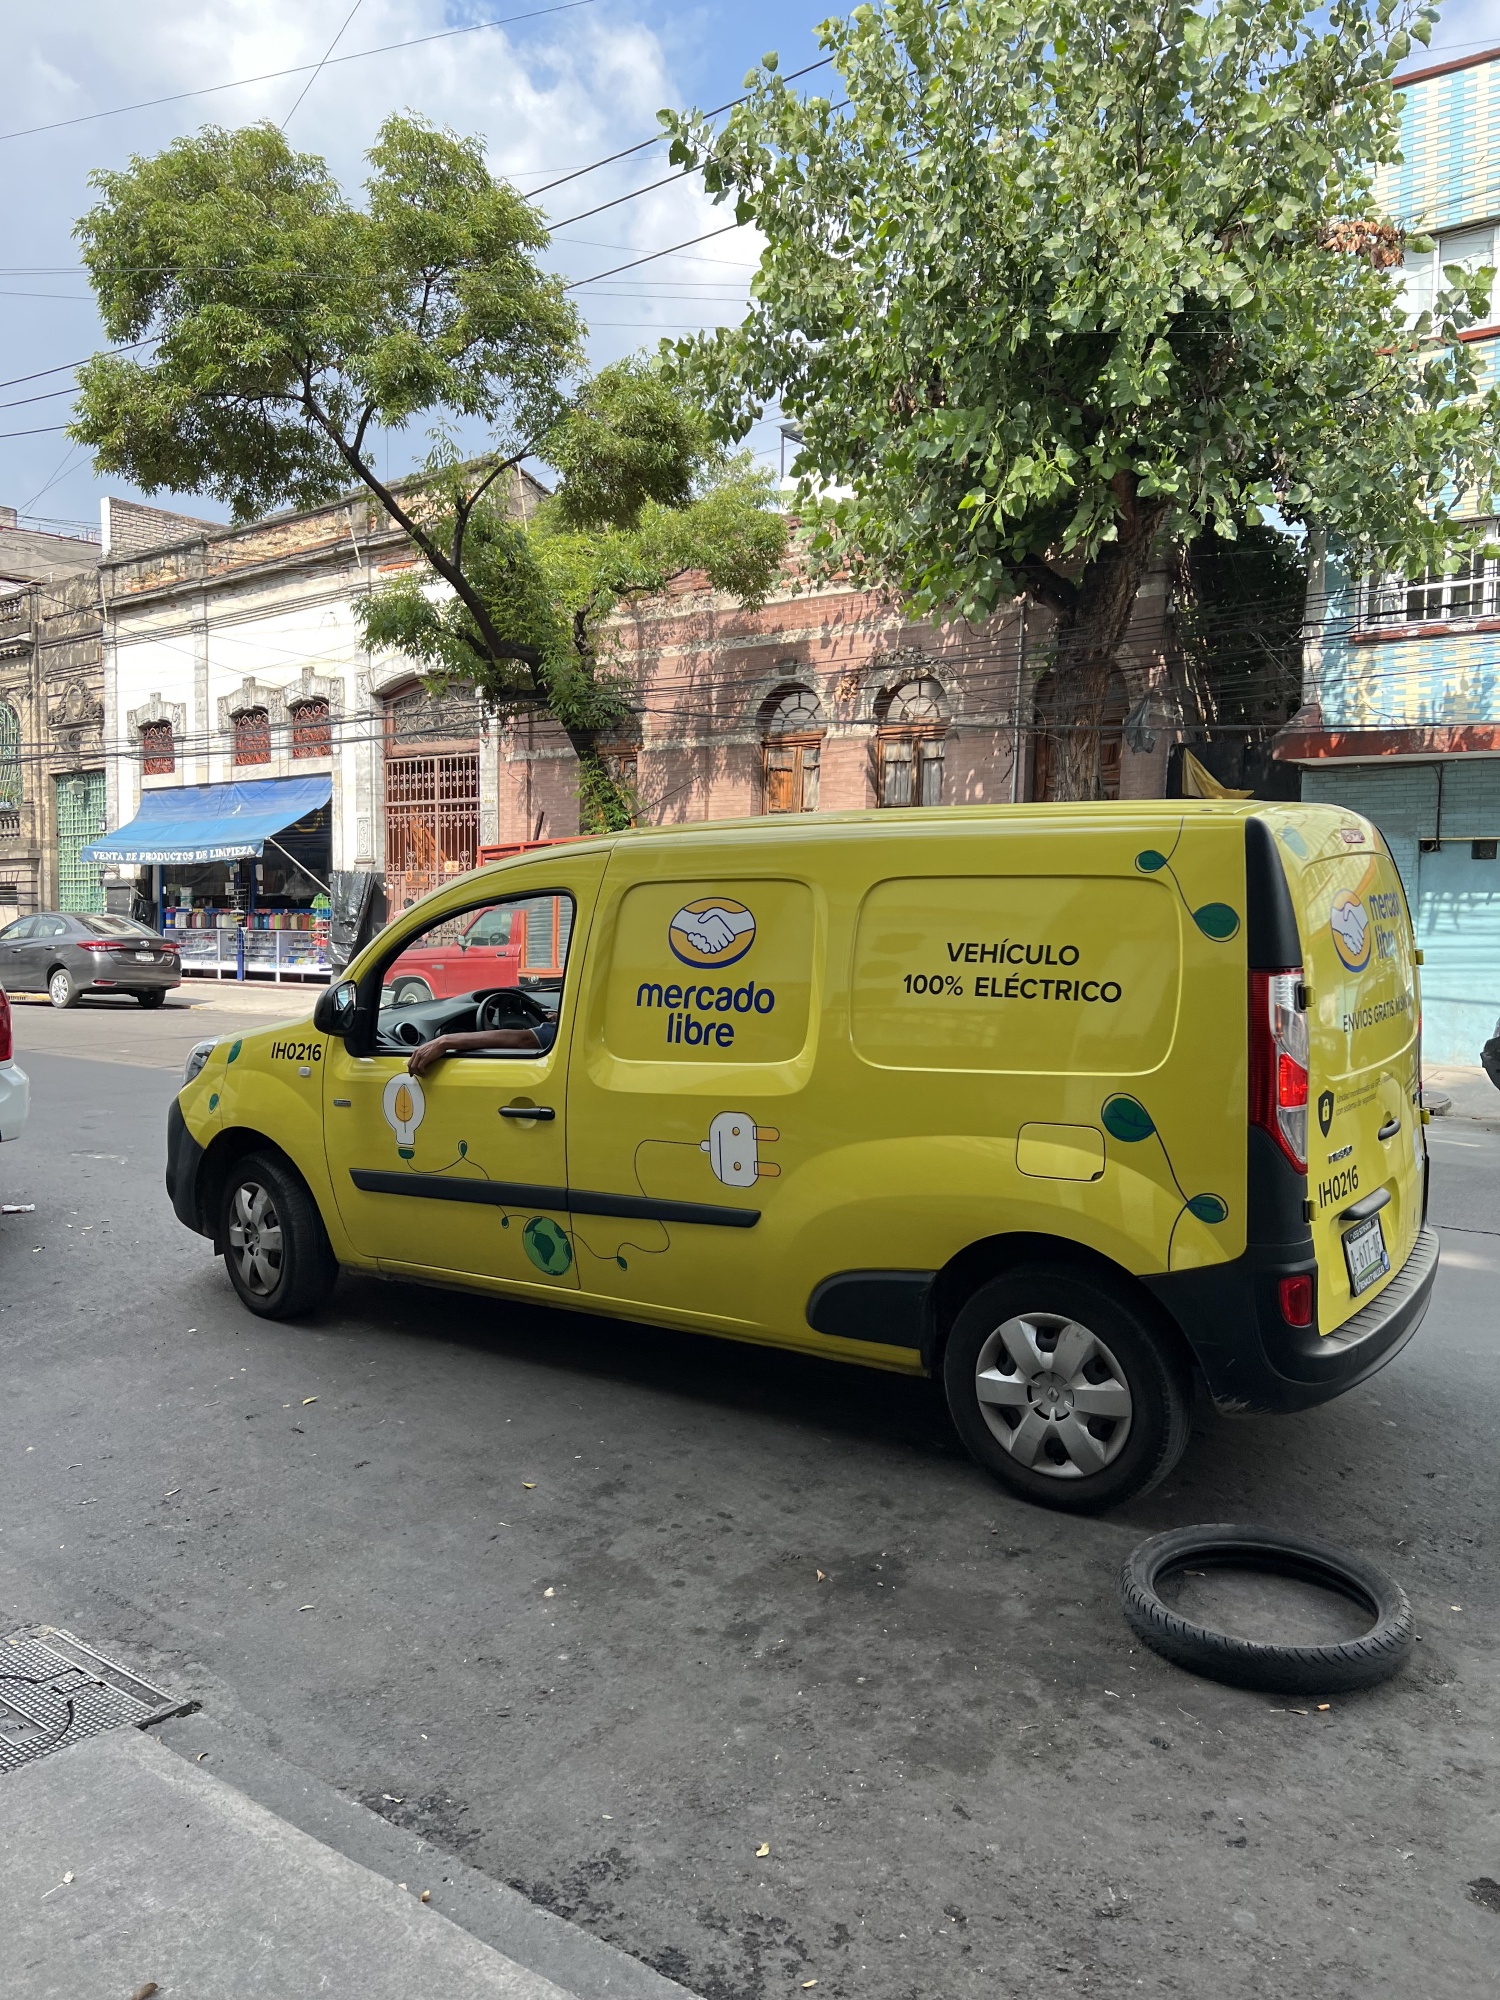 Another reason I love Mexico City: I can get deliveries from my online shopping! Mercado Libre is like their local Amazon, and I'm amazed they have electric vehicles doing their deliveries.